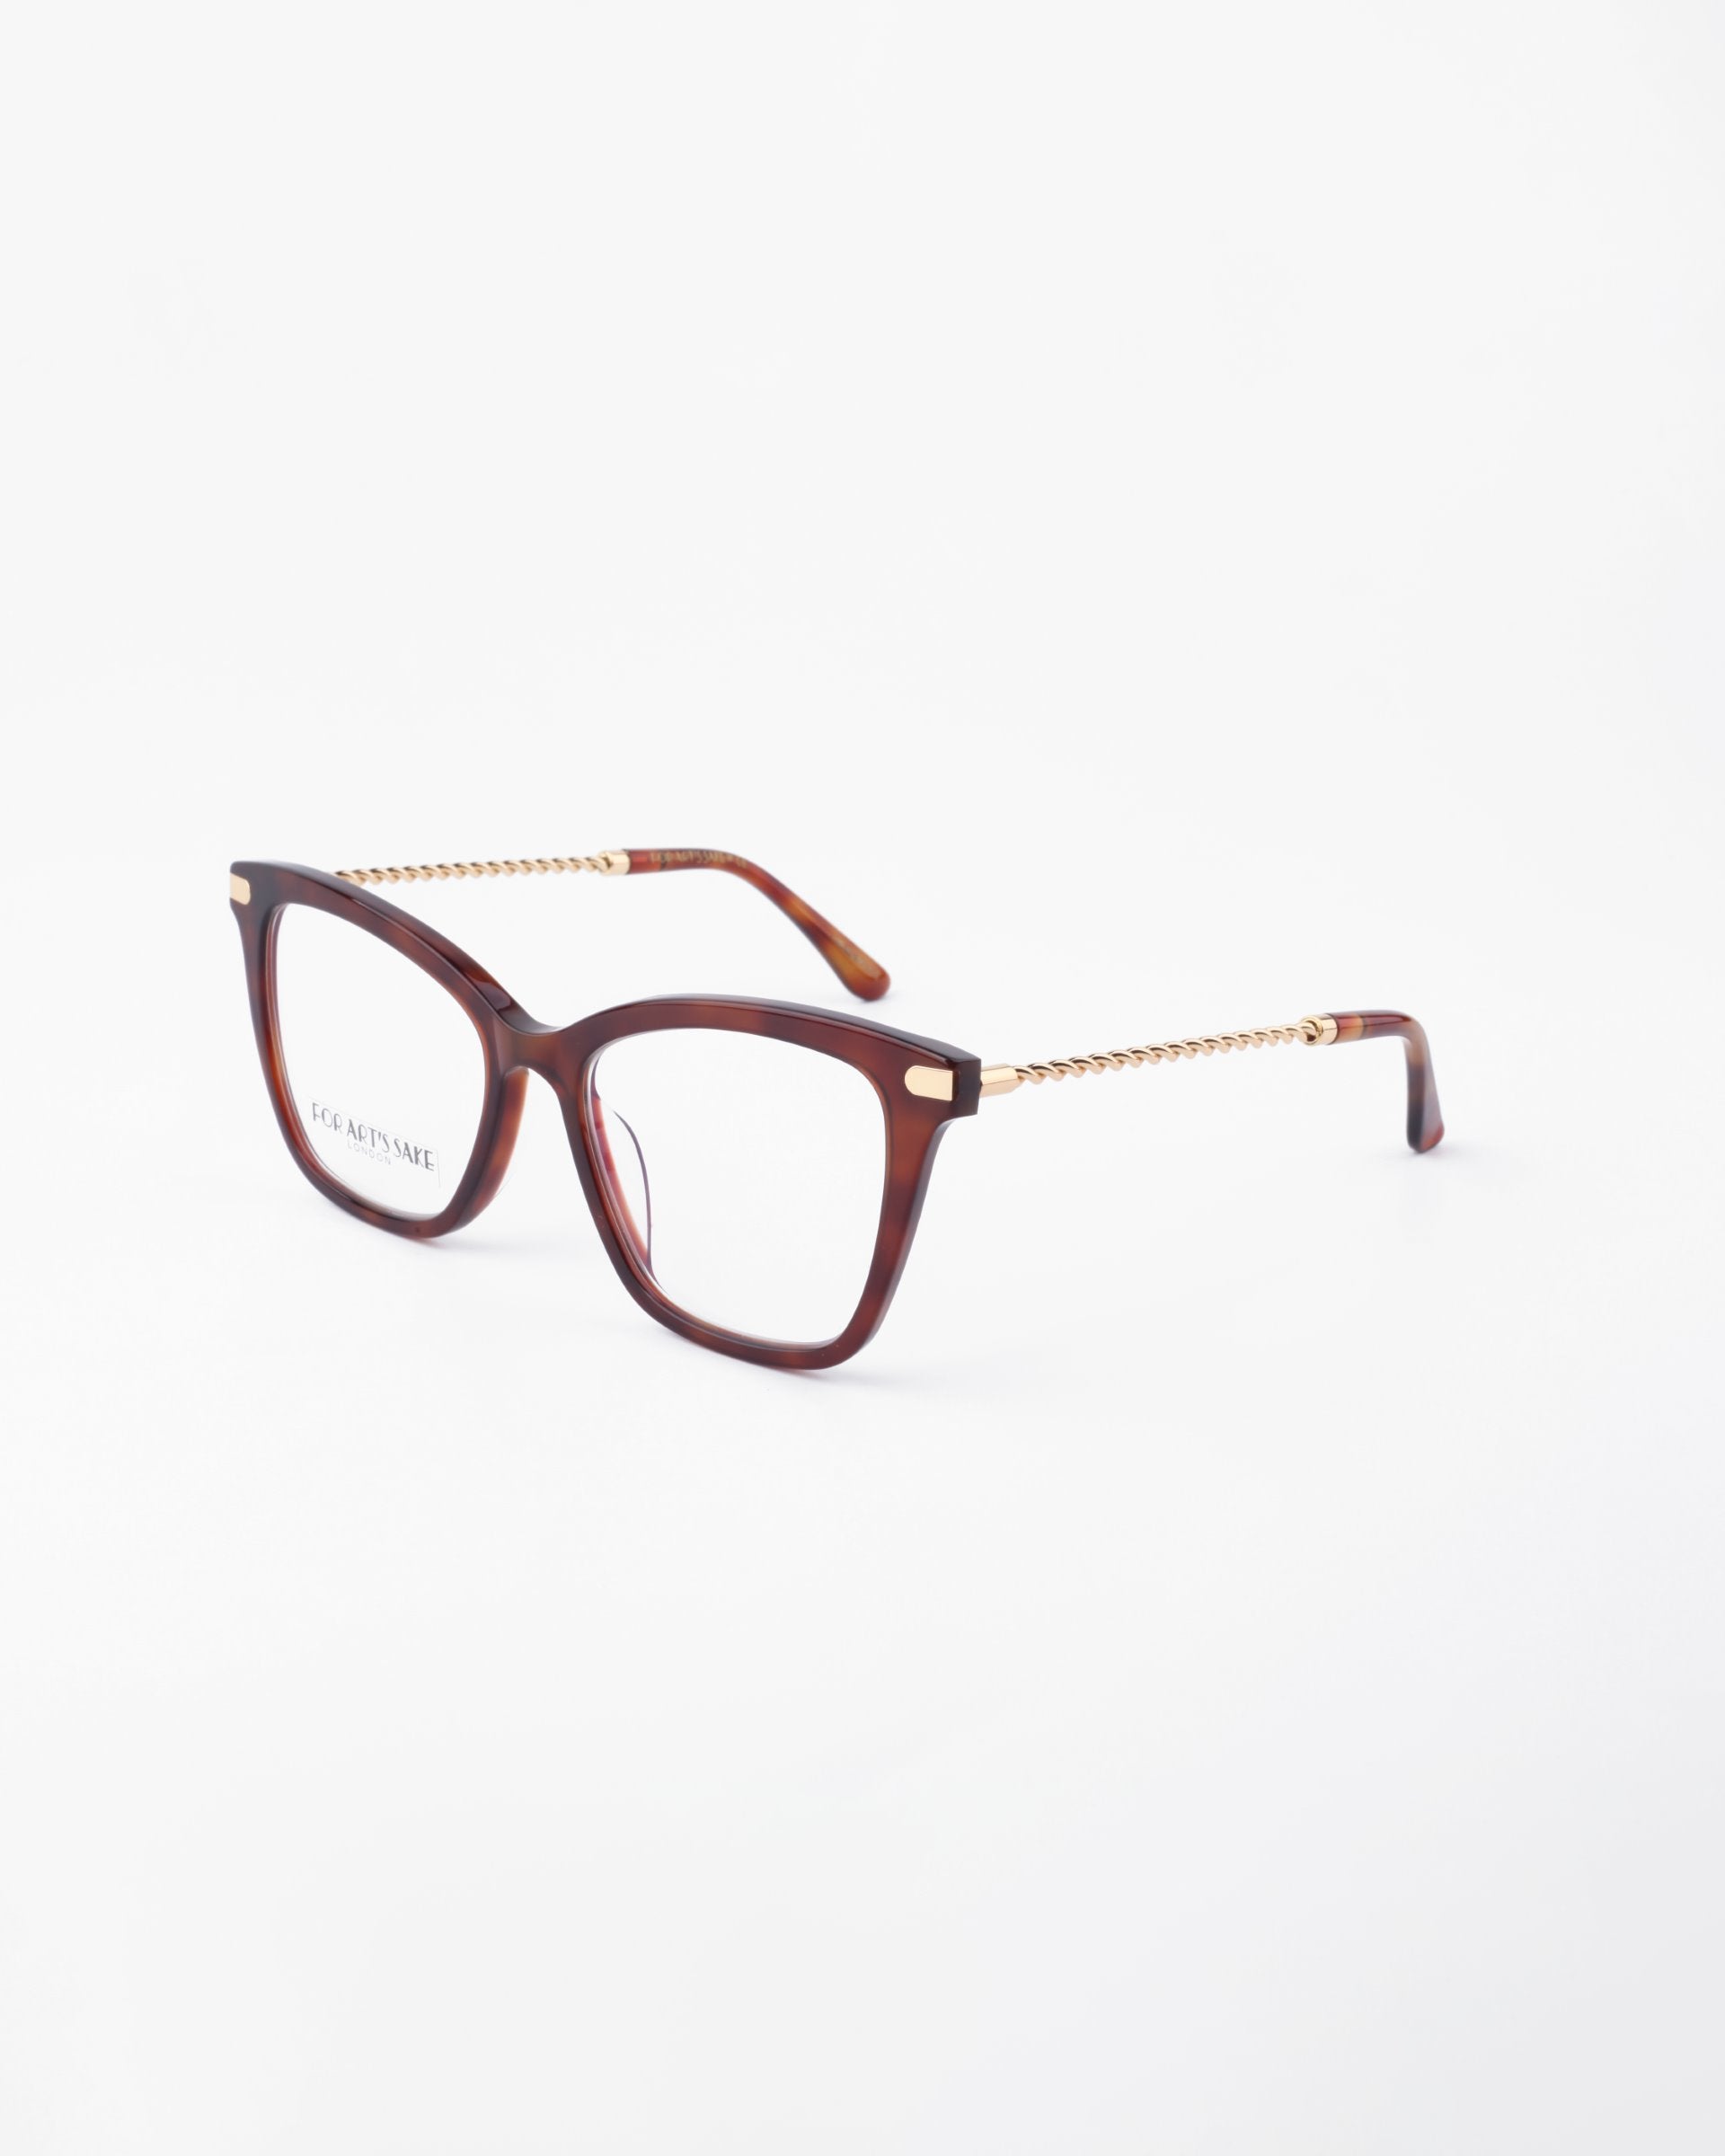 A pair of Paris Two eyeglasses by For Art&#39;s Sake® with a tortoiseshell frame and gold temples is displayed against a white background. The temples have a chain-like design, the clear lenses offer UV protection, and are suitable for prescription use. The brand &quot;For Art&#39;s Sake®&quot; is visible on the lens.